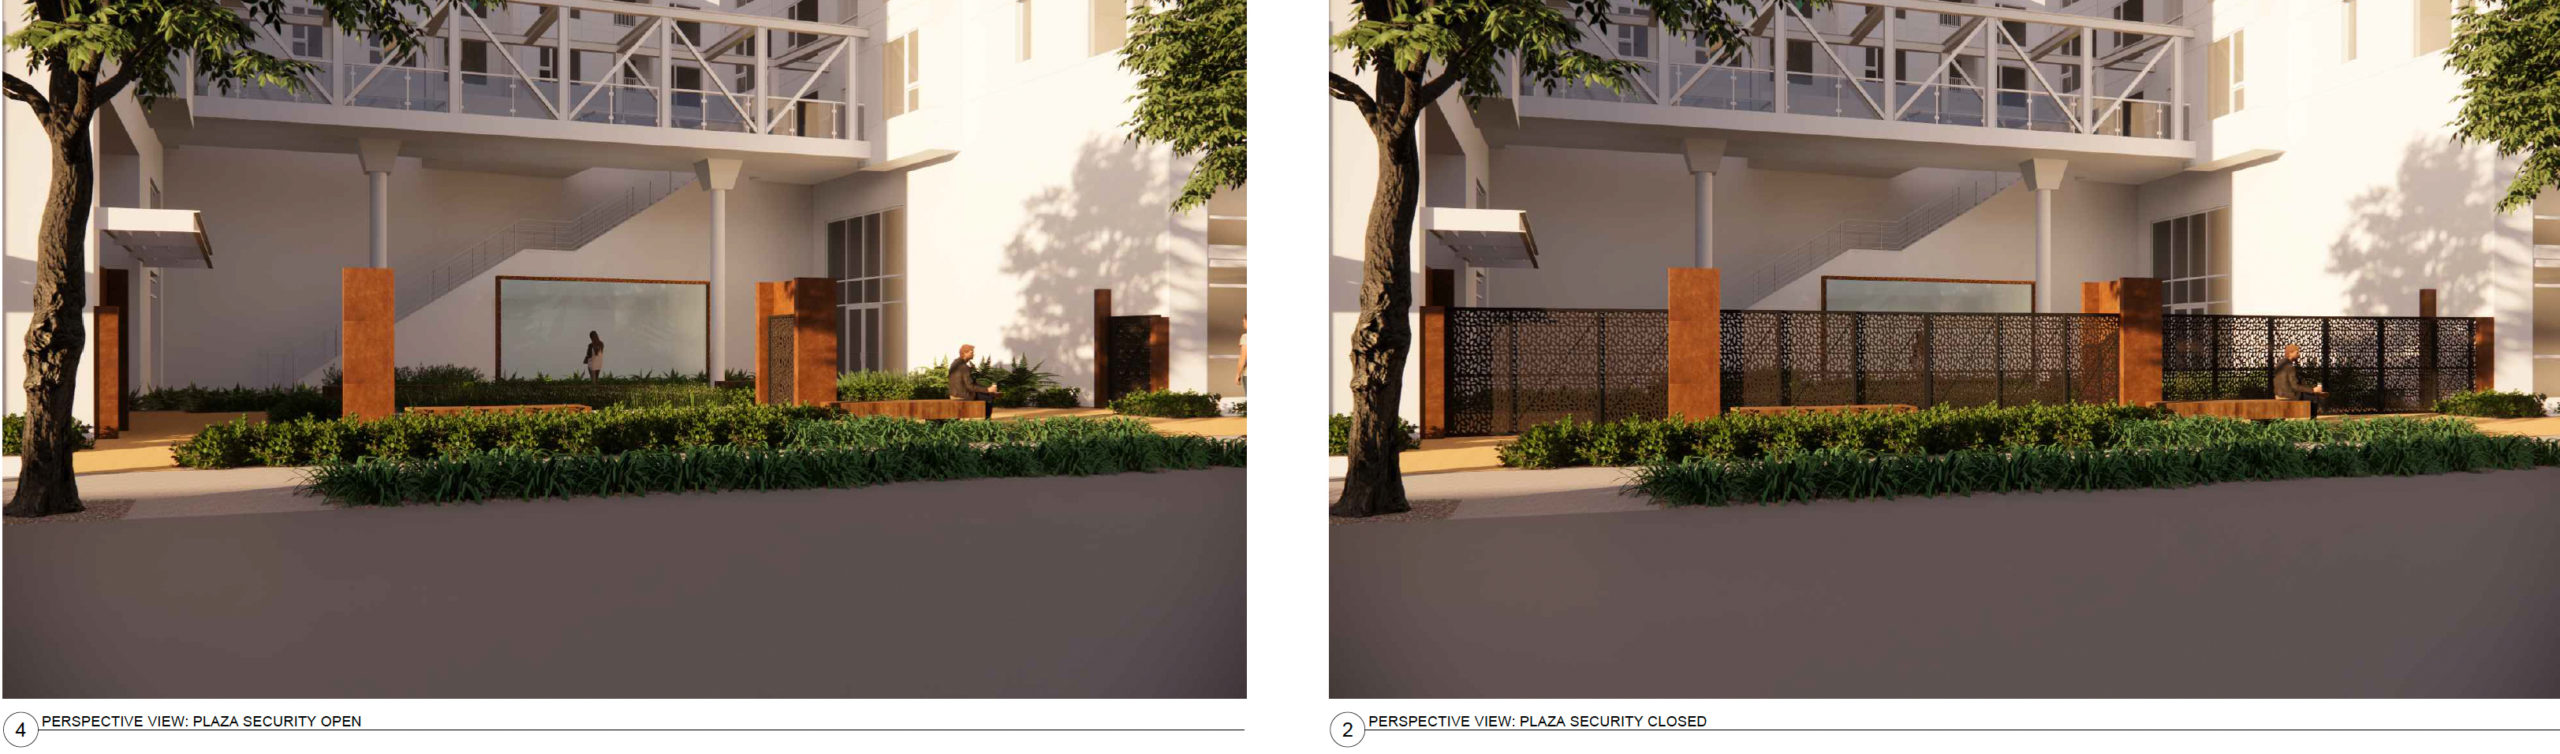 1 Adrian Court plaza gates, rendering by Seidel Architects